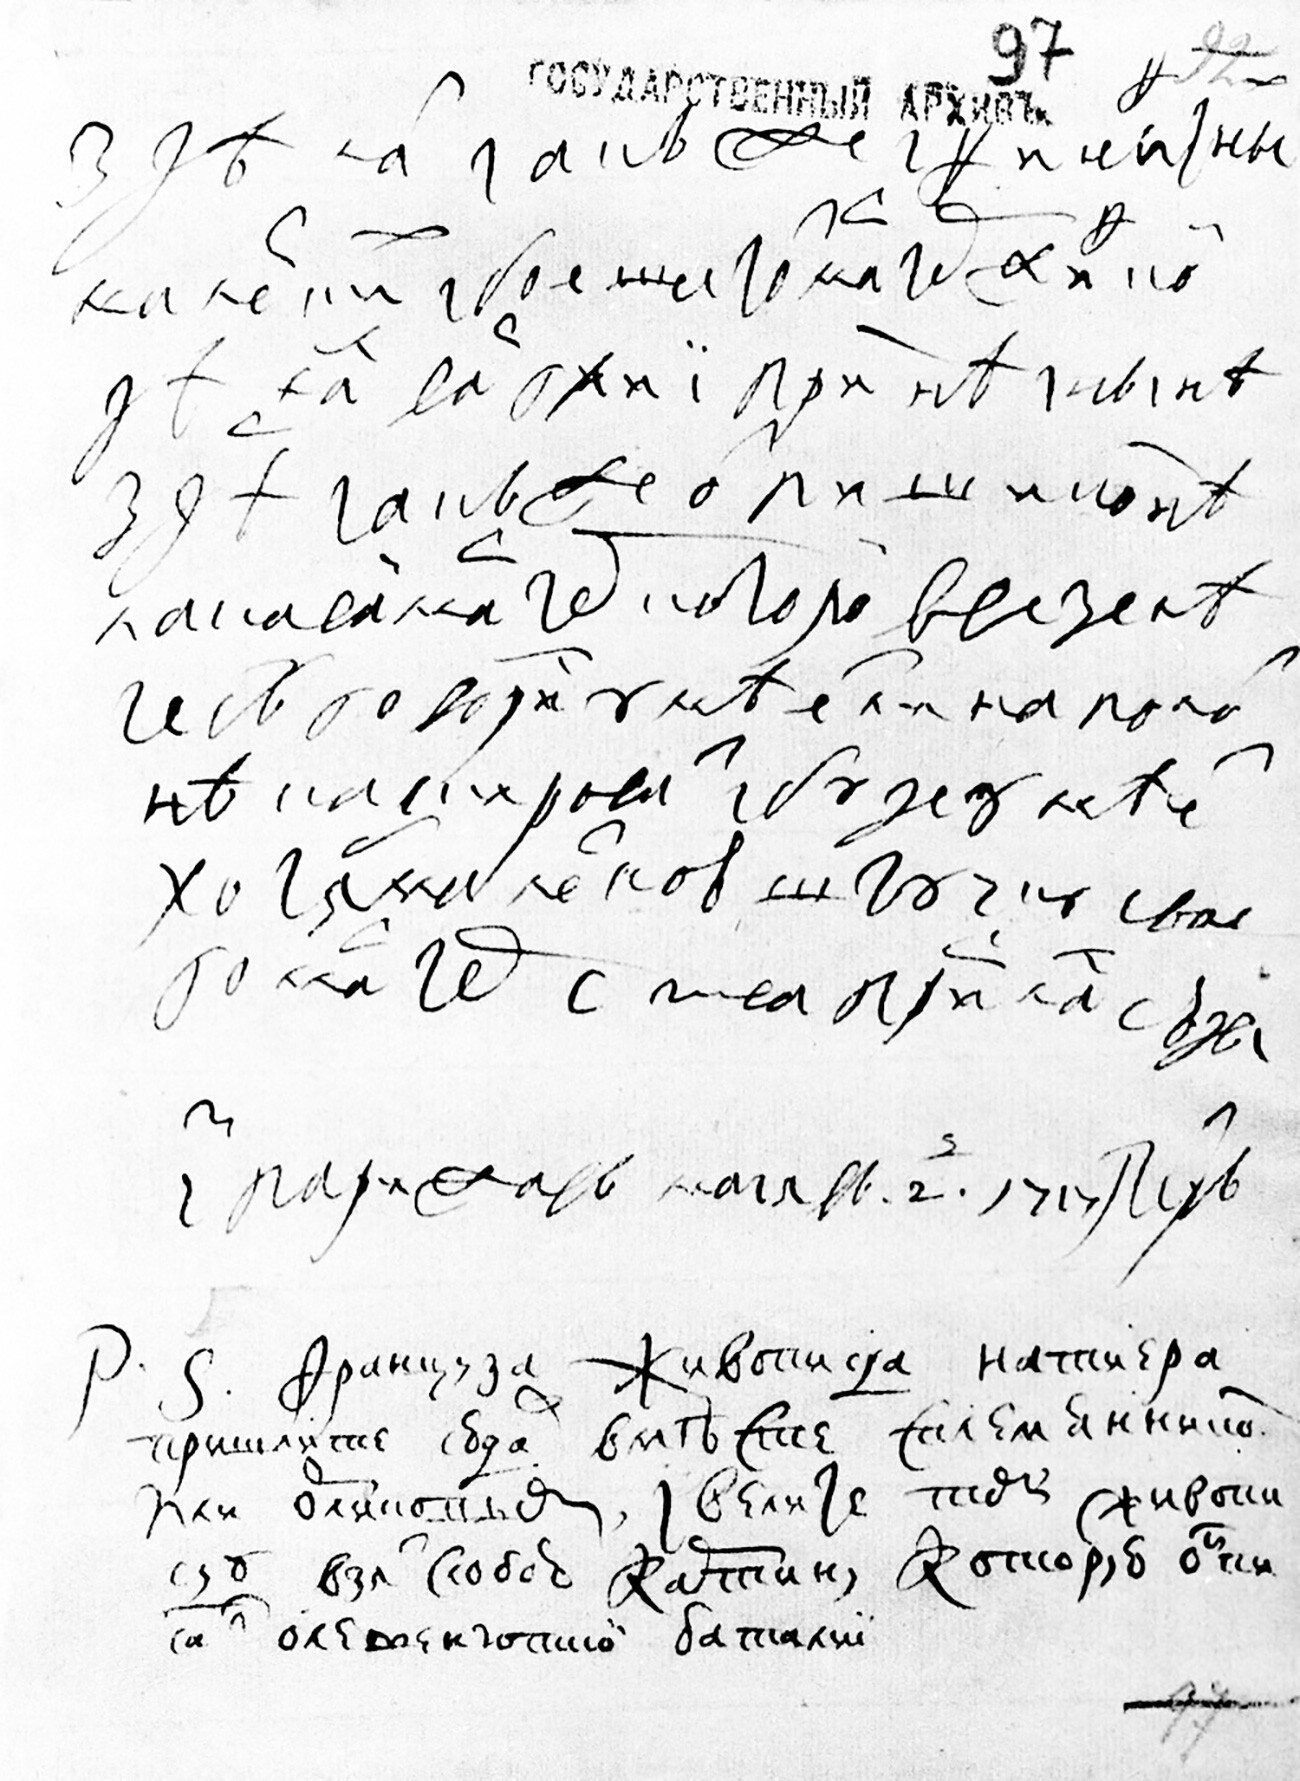 Peter the Great's fast handwriting (above), compared to his more decipherable neat handwriting (below)